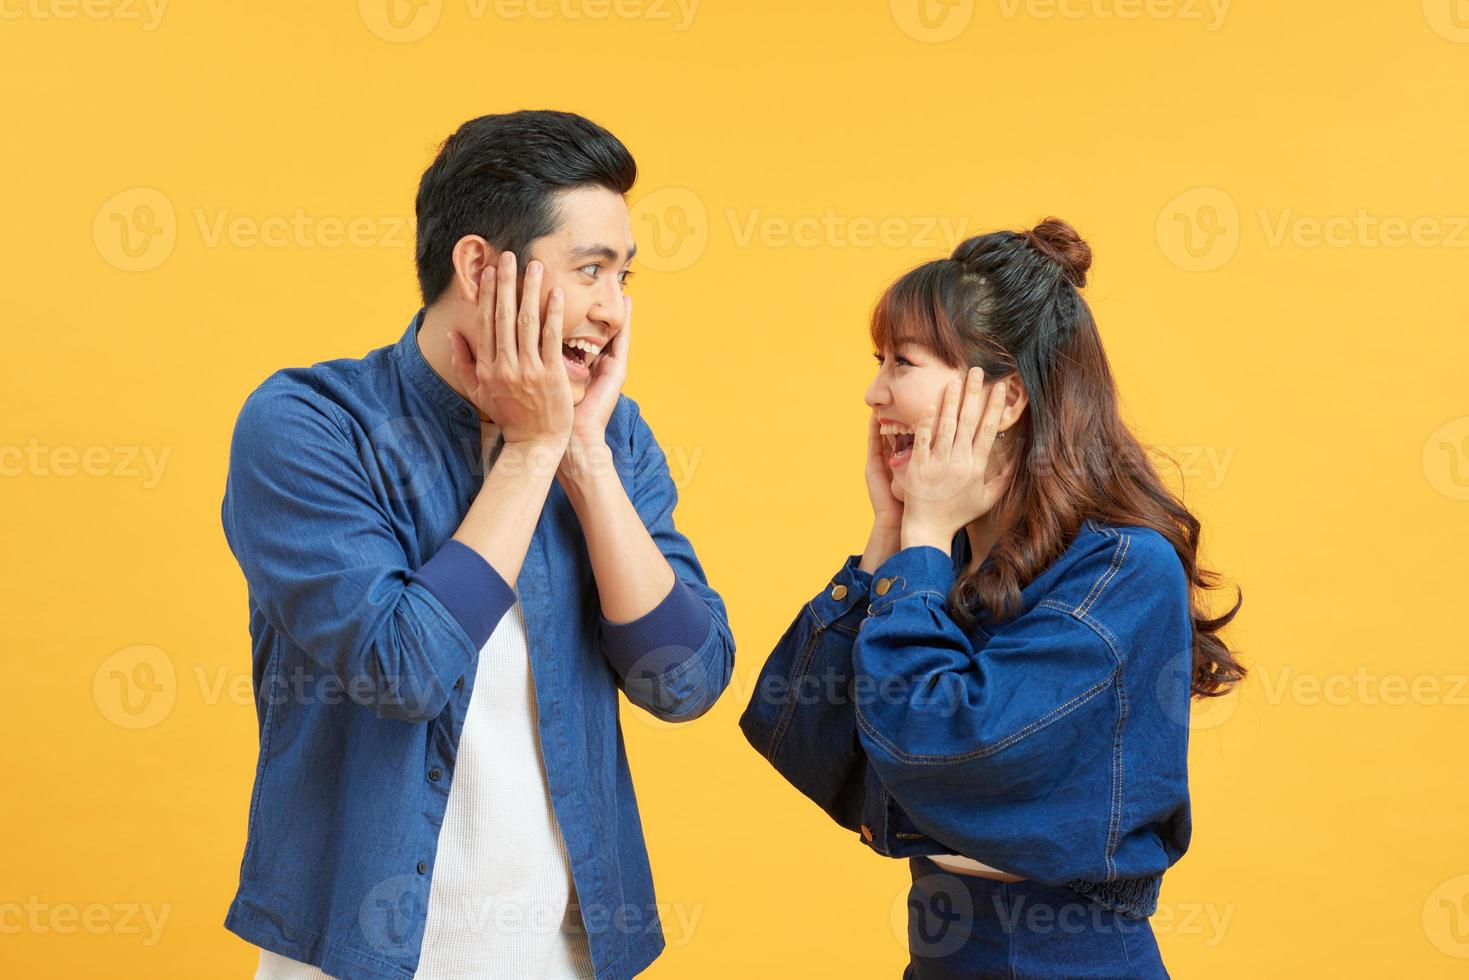 Studio shot of cheerful young people, clasp hands near face, rejoice positive moments in life, look joyfully at camera,  Emotions concept photo